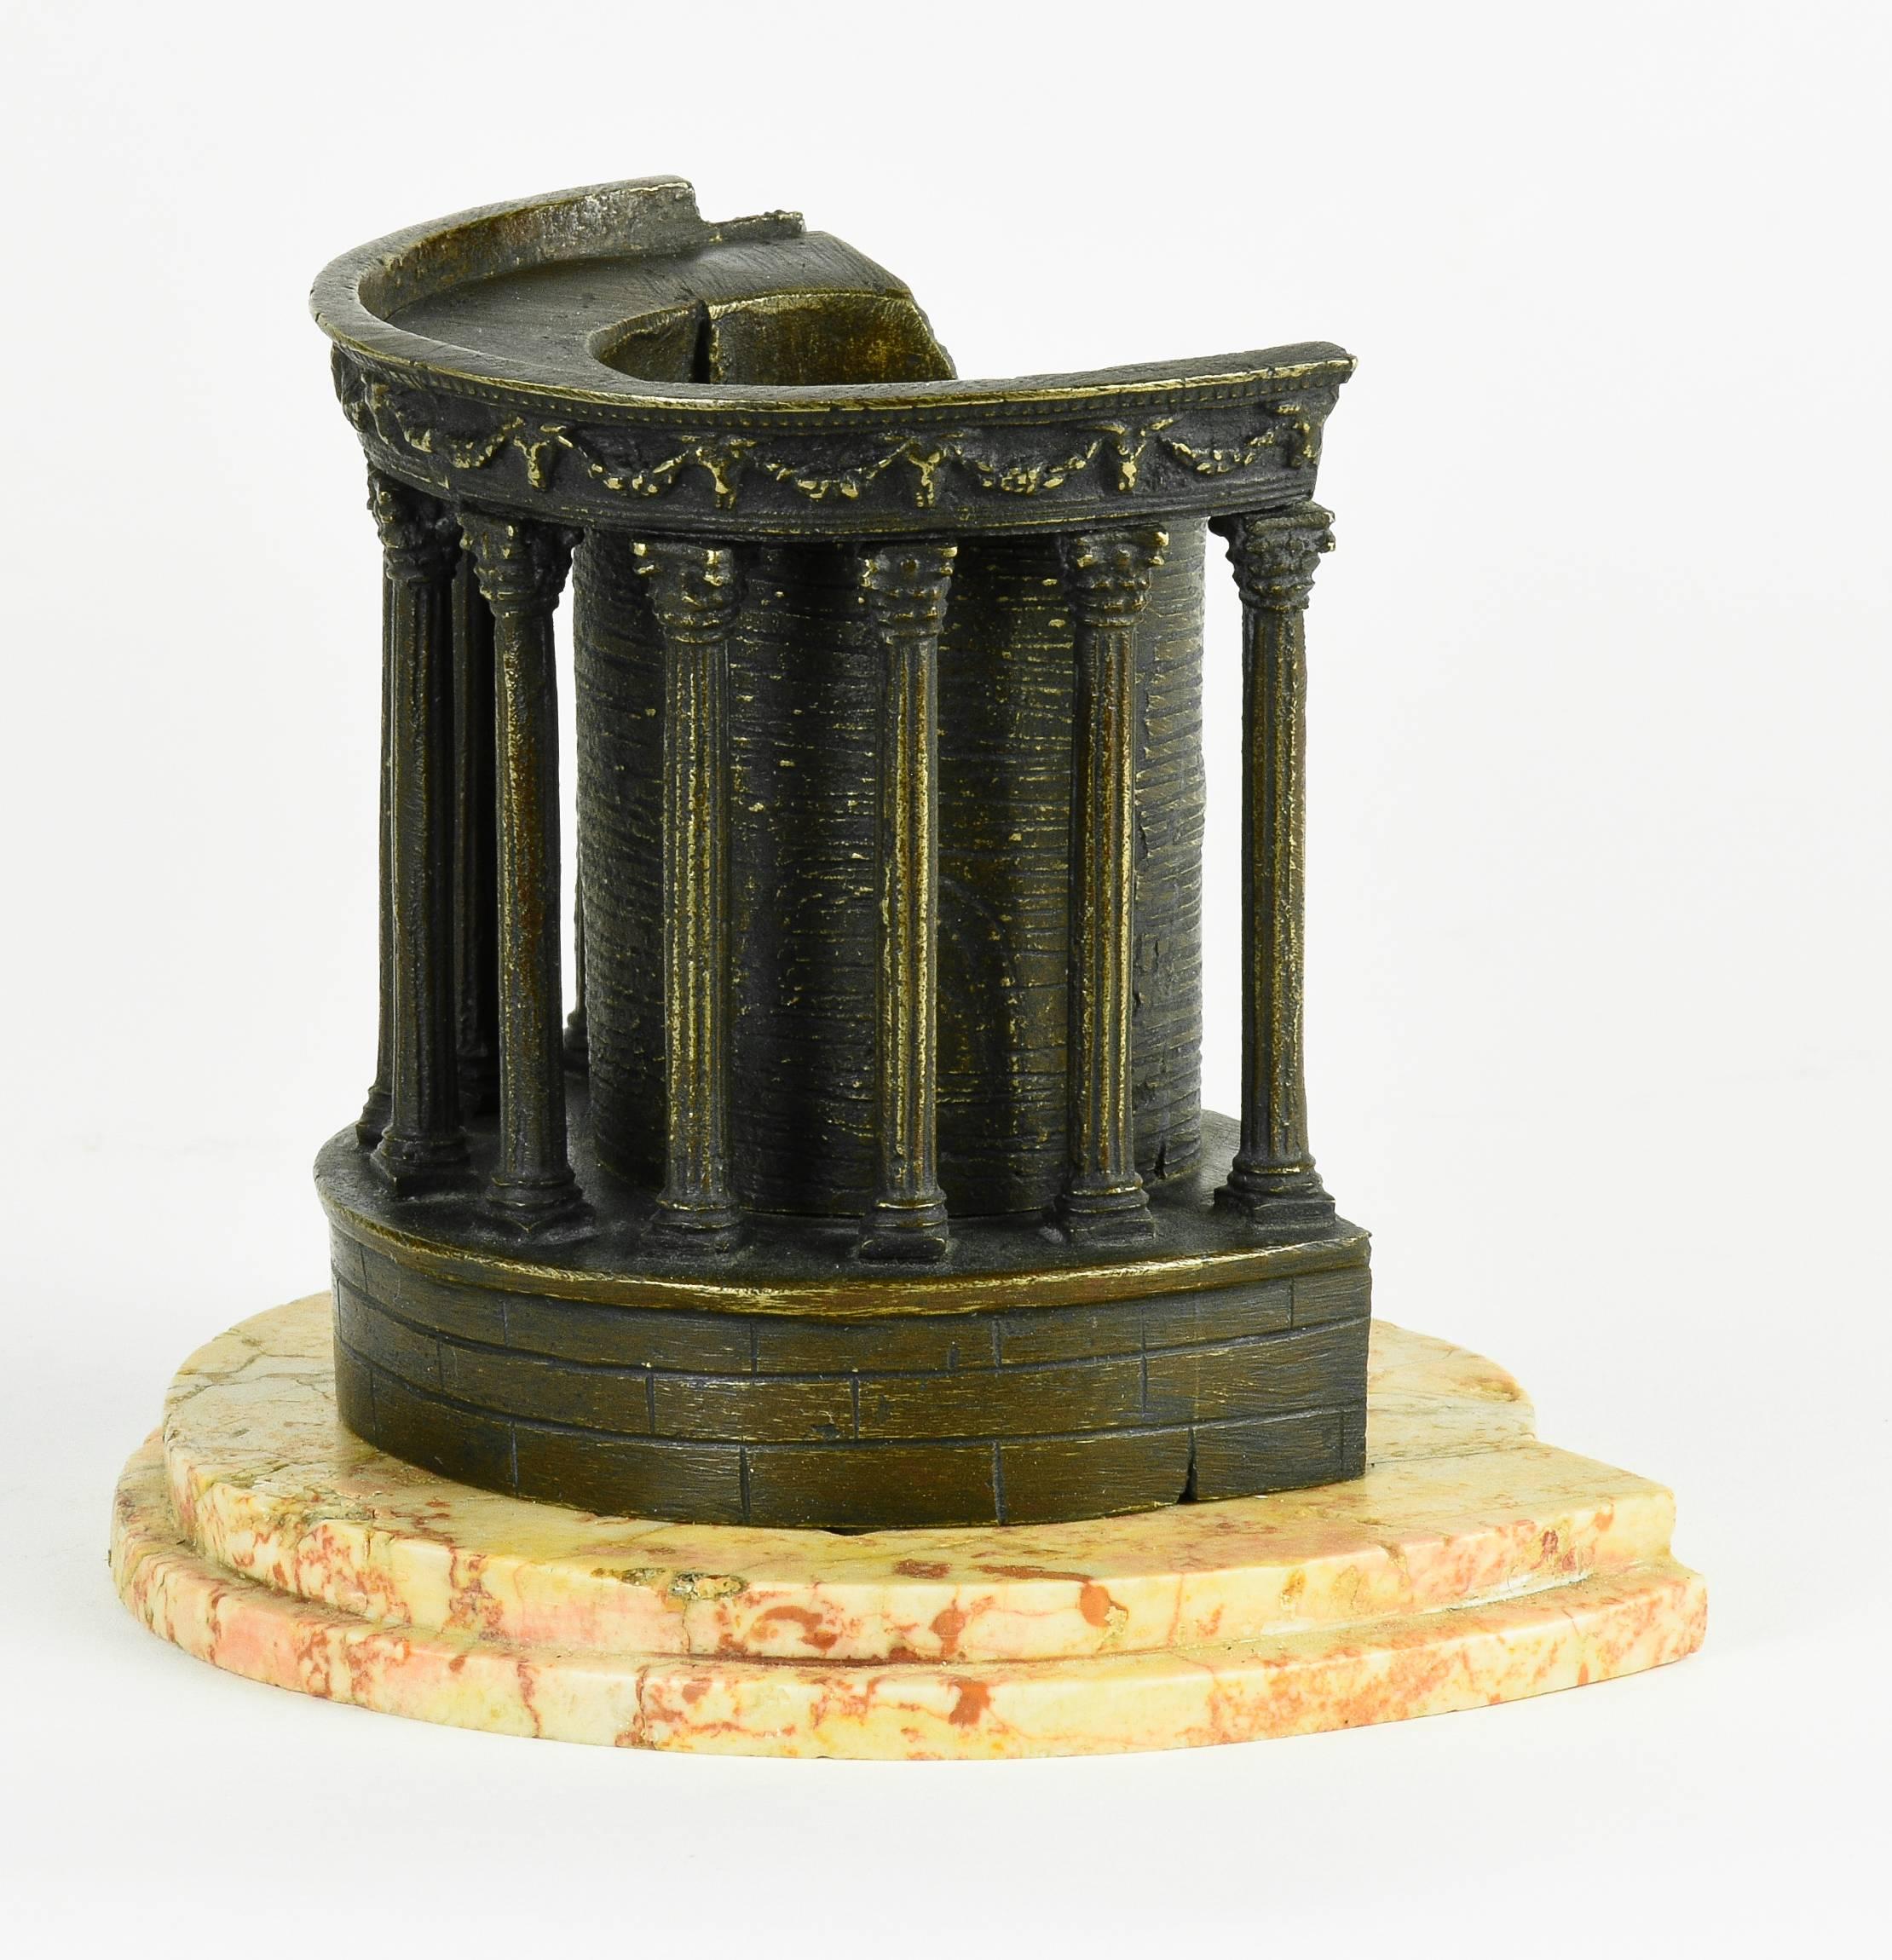 Carved Scarce Bronze Grand Tour Architectural Model of the Temple of Sibyl, Tivoli